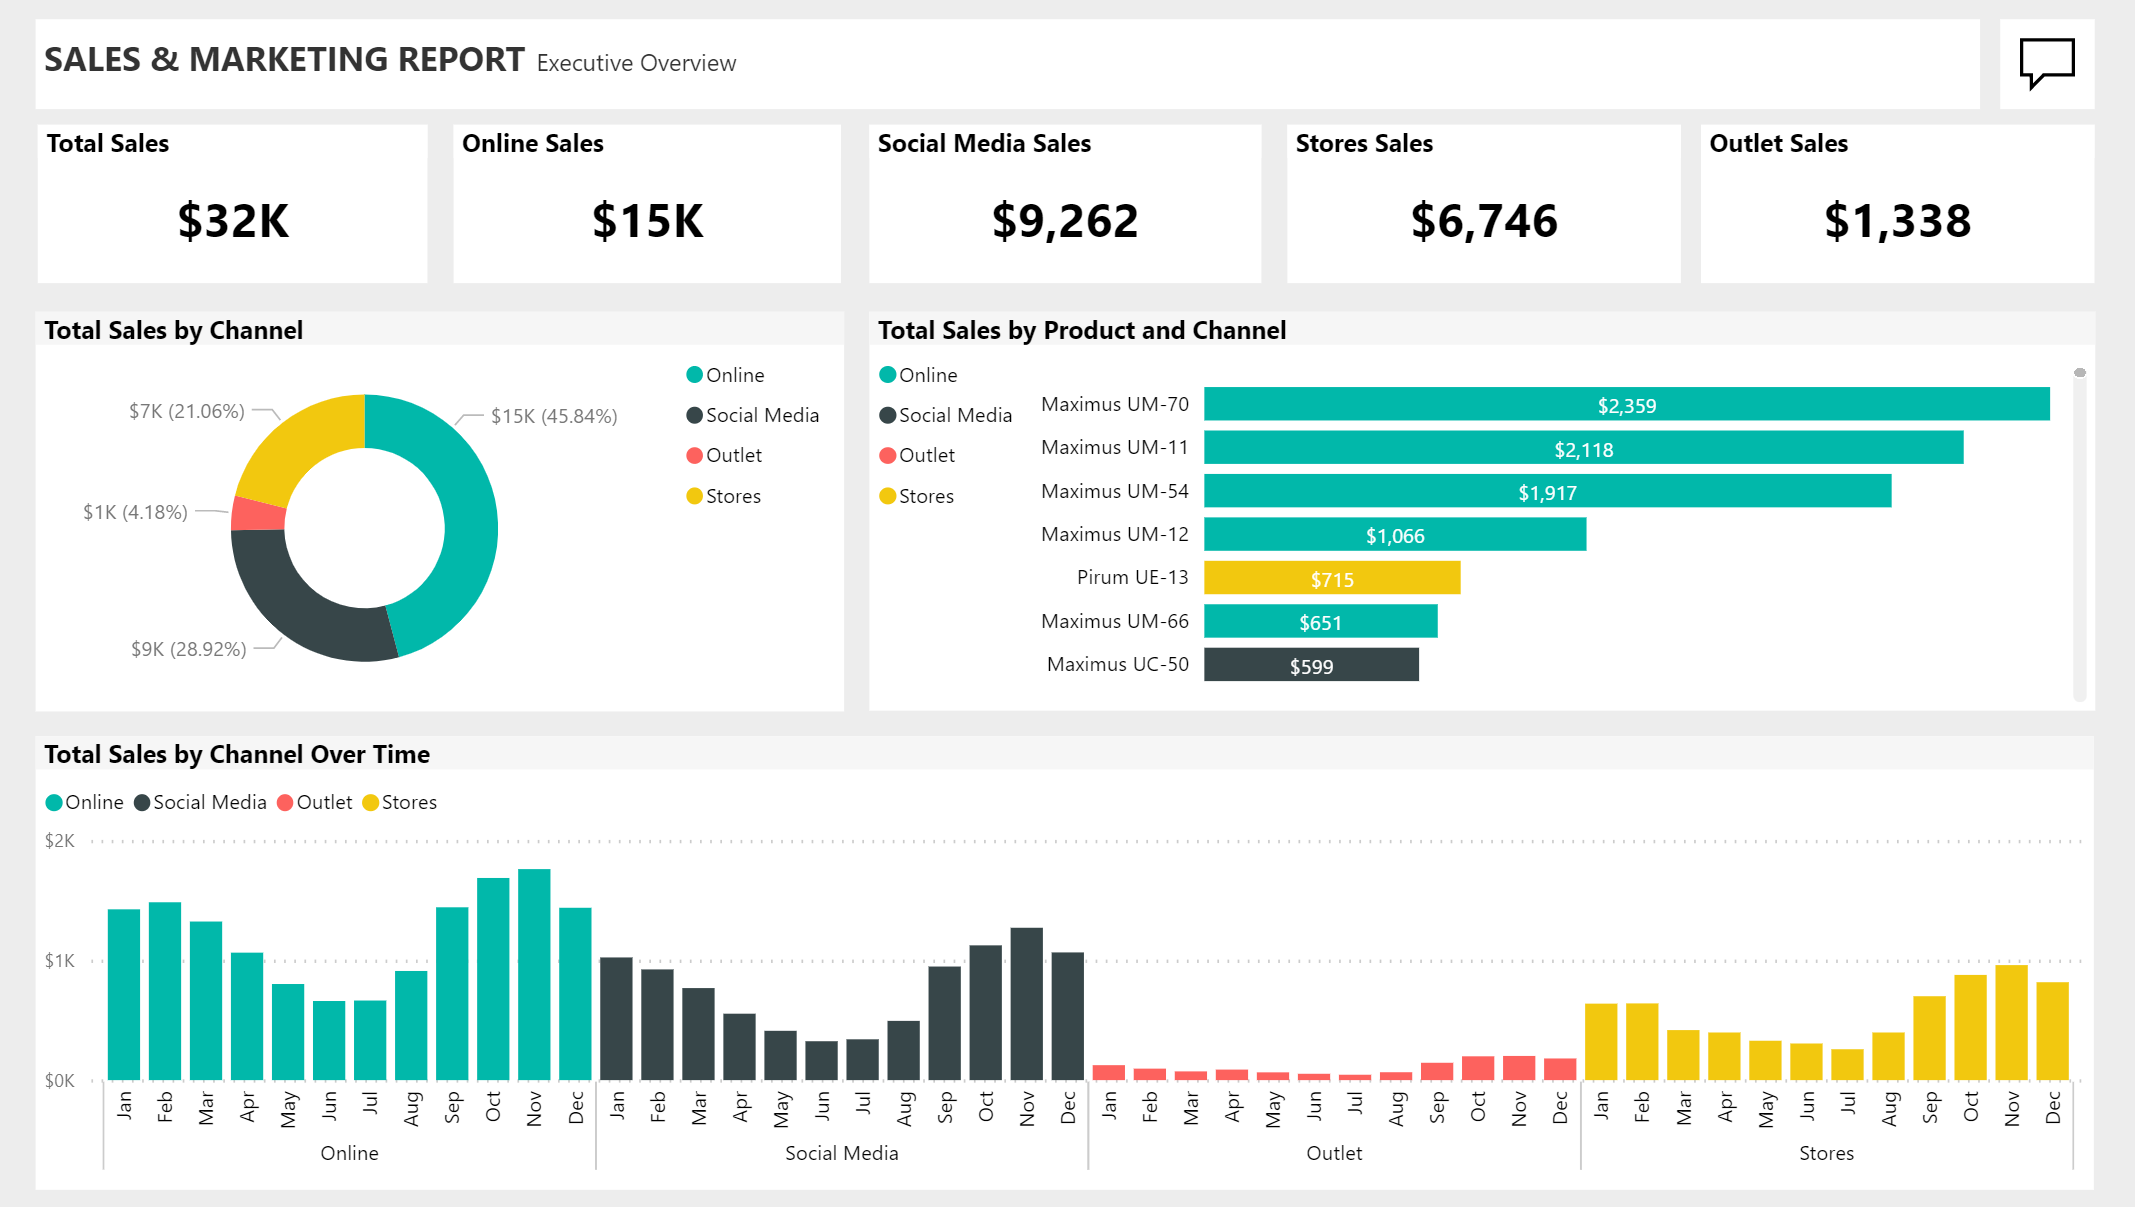 Power BI report displaying sales and marketing data including key metrics such as total sales and online sales. The report looks at sales data by product and channel and over time in a bar chart.